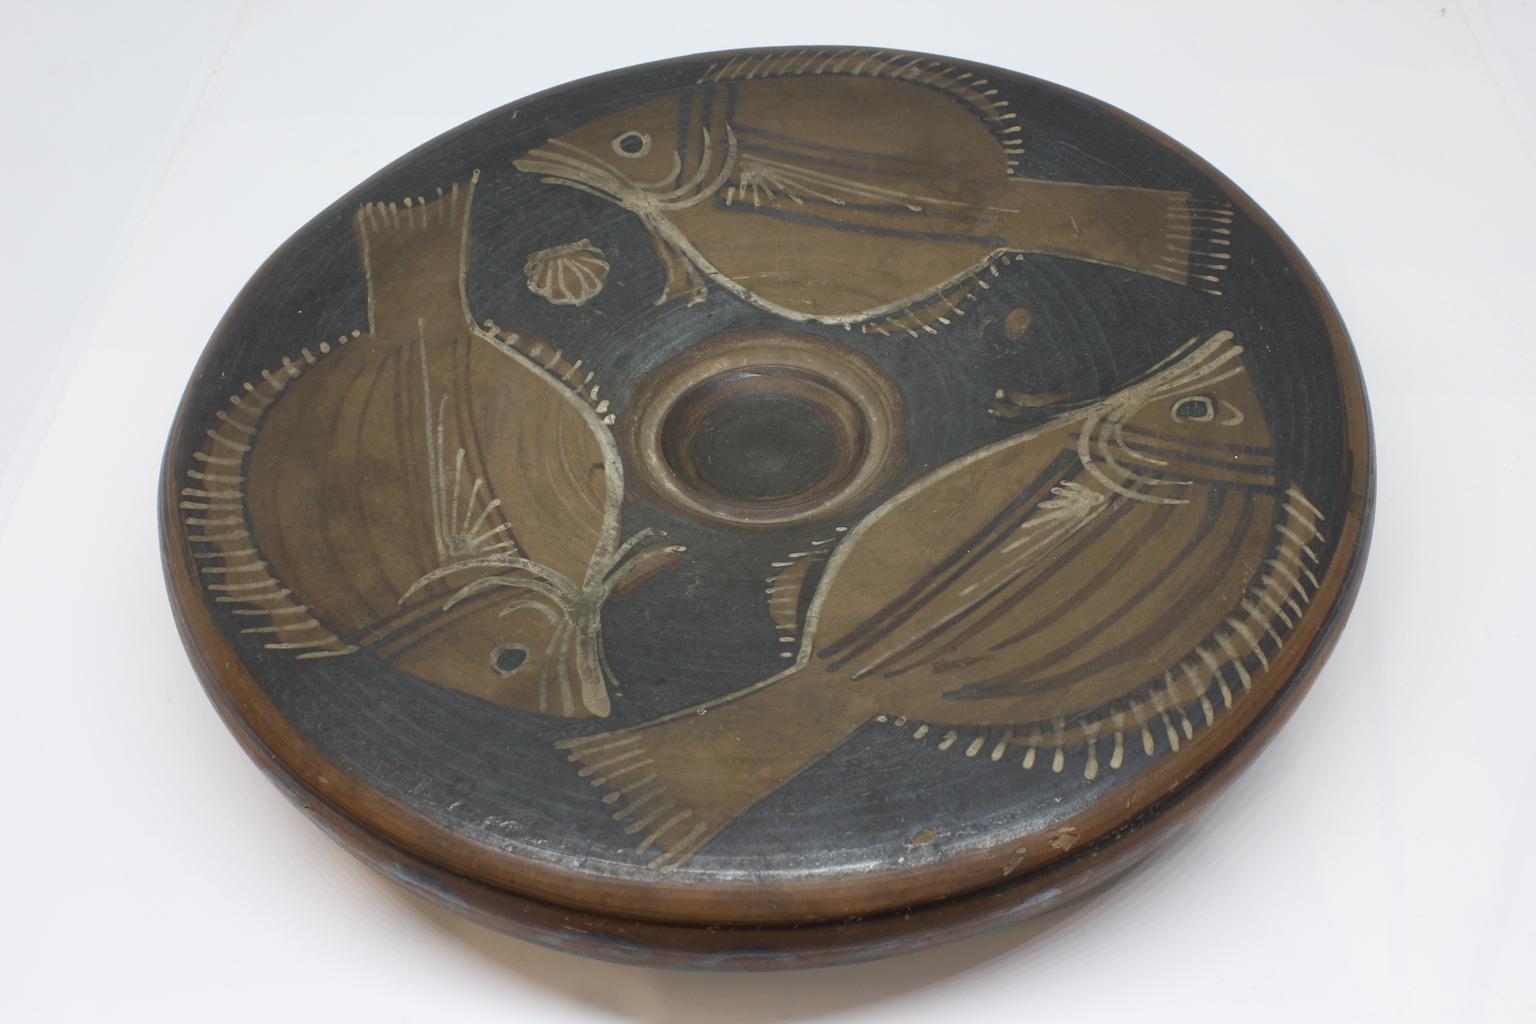 Ancient ceramic plate with fish decors. Apulia, 4th century BC. 
With certificate.
In good condition.
Dimensions: Diameter 25cm, height 5 cm.